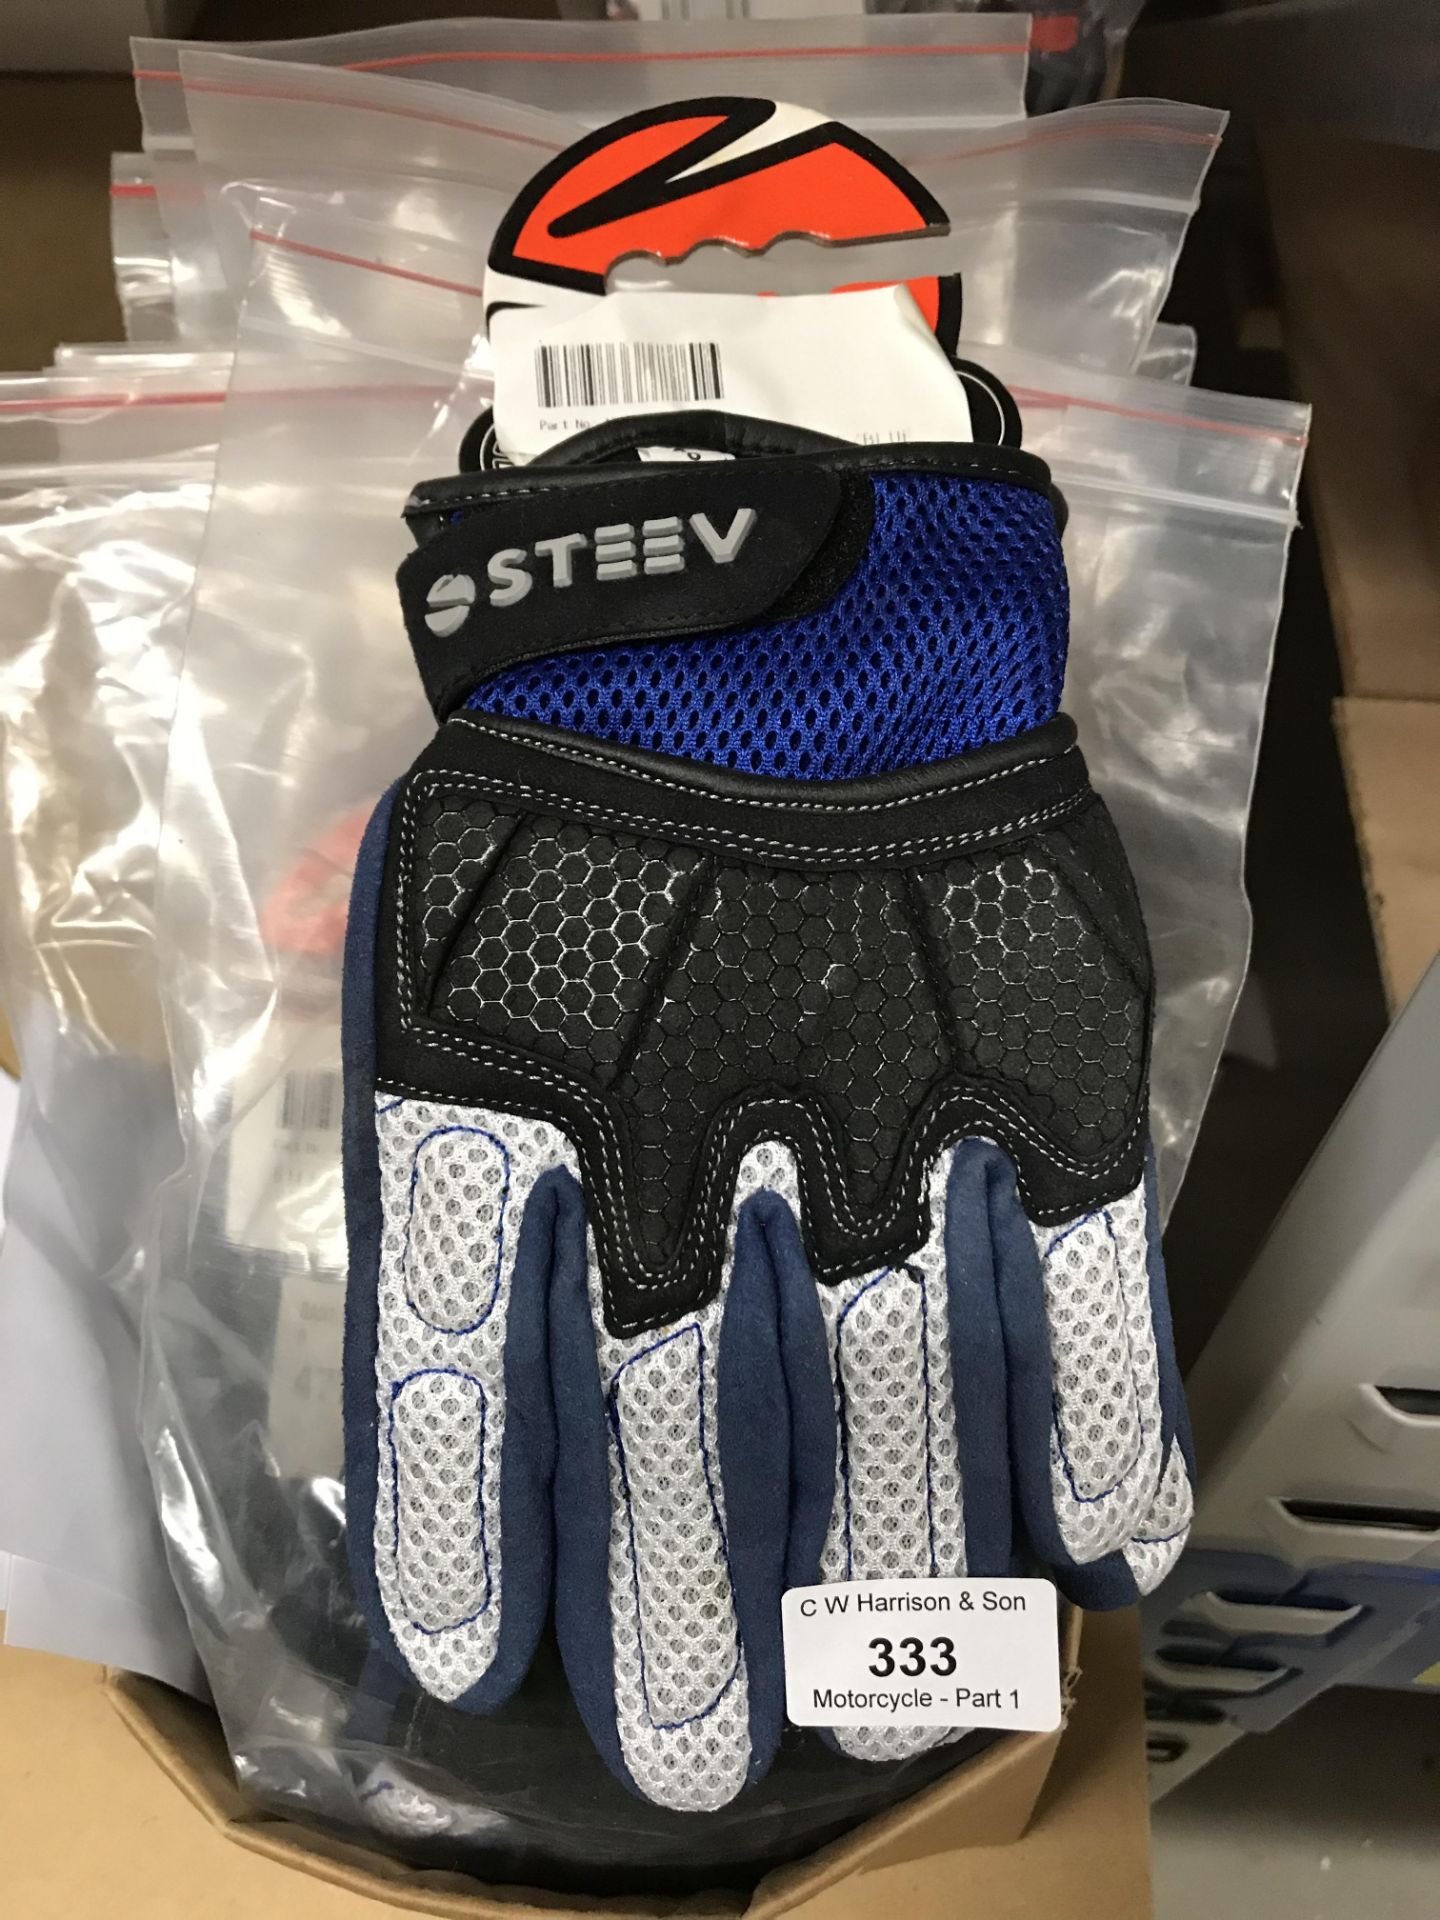 Contents to box - 10 x pairs of Steev Superbike gloves - black/blue - S